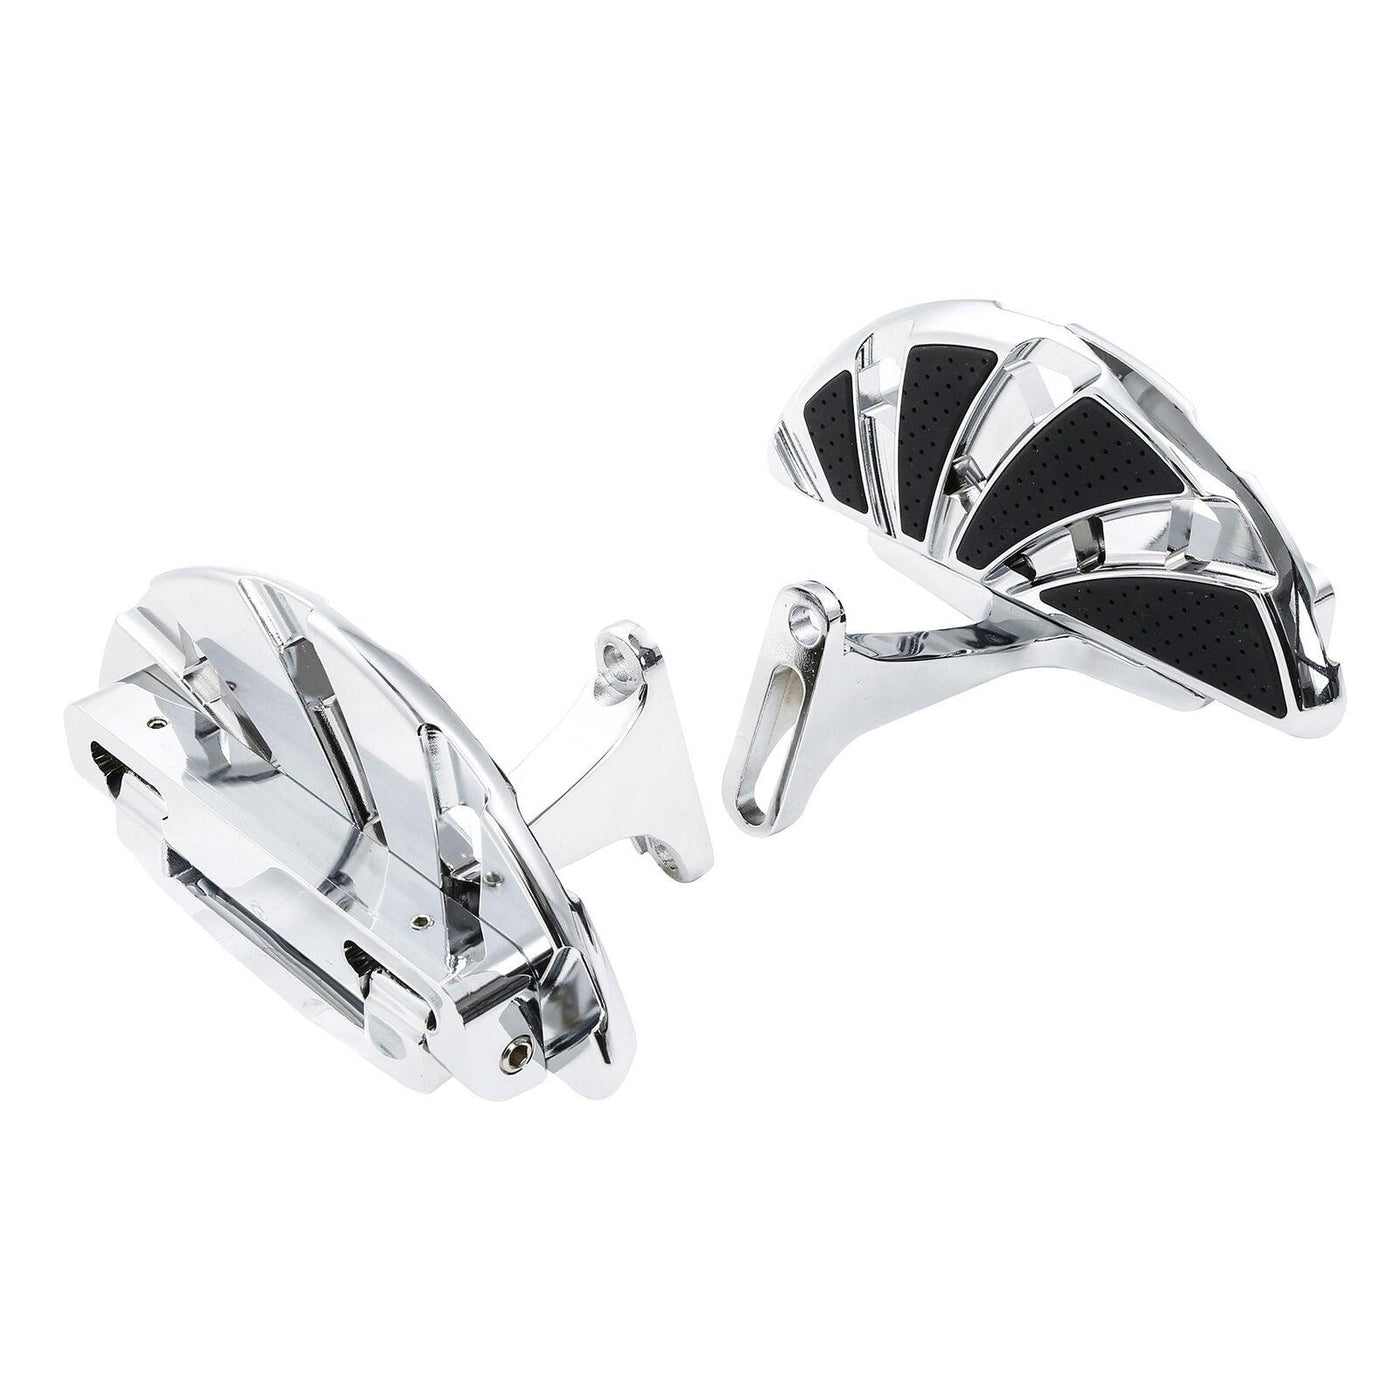 Rear Passenger Floorboard Foot board Fit For Harley Road Glide King 93-21 Chrome - Moto Life Products